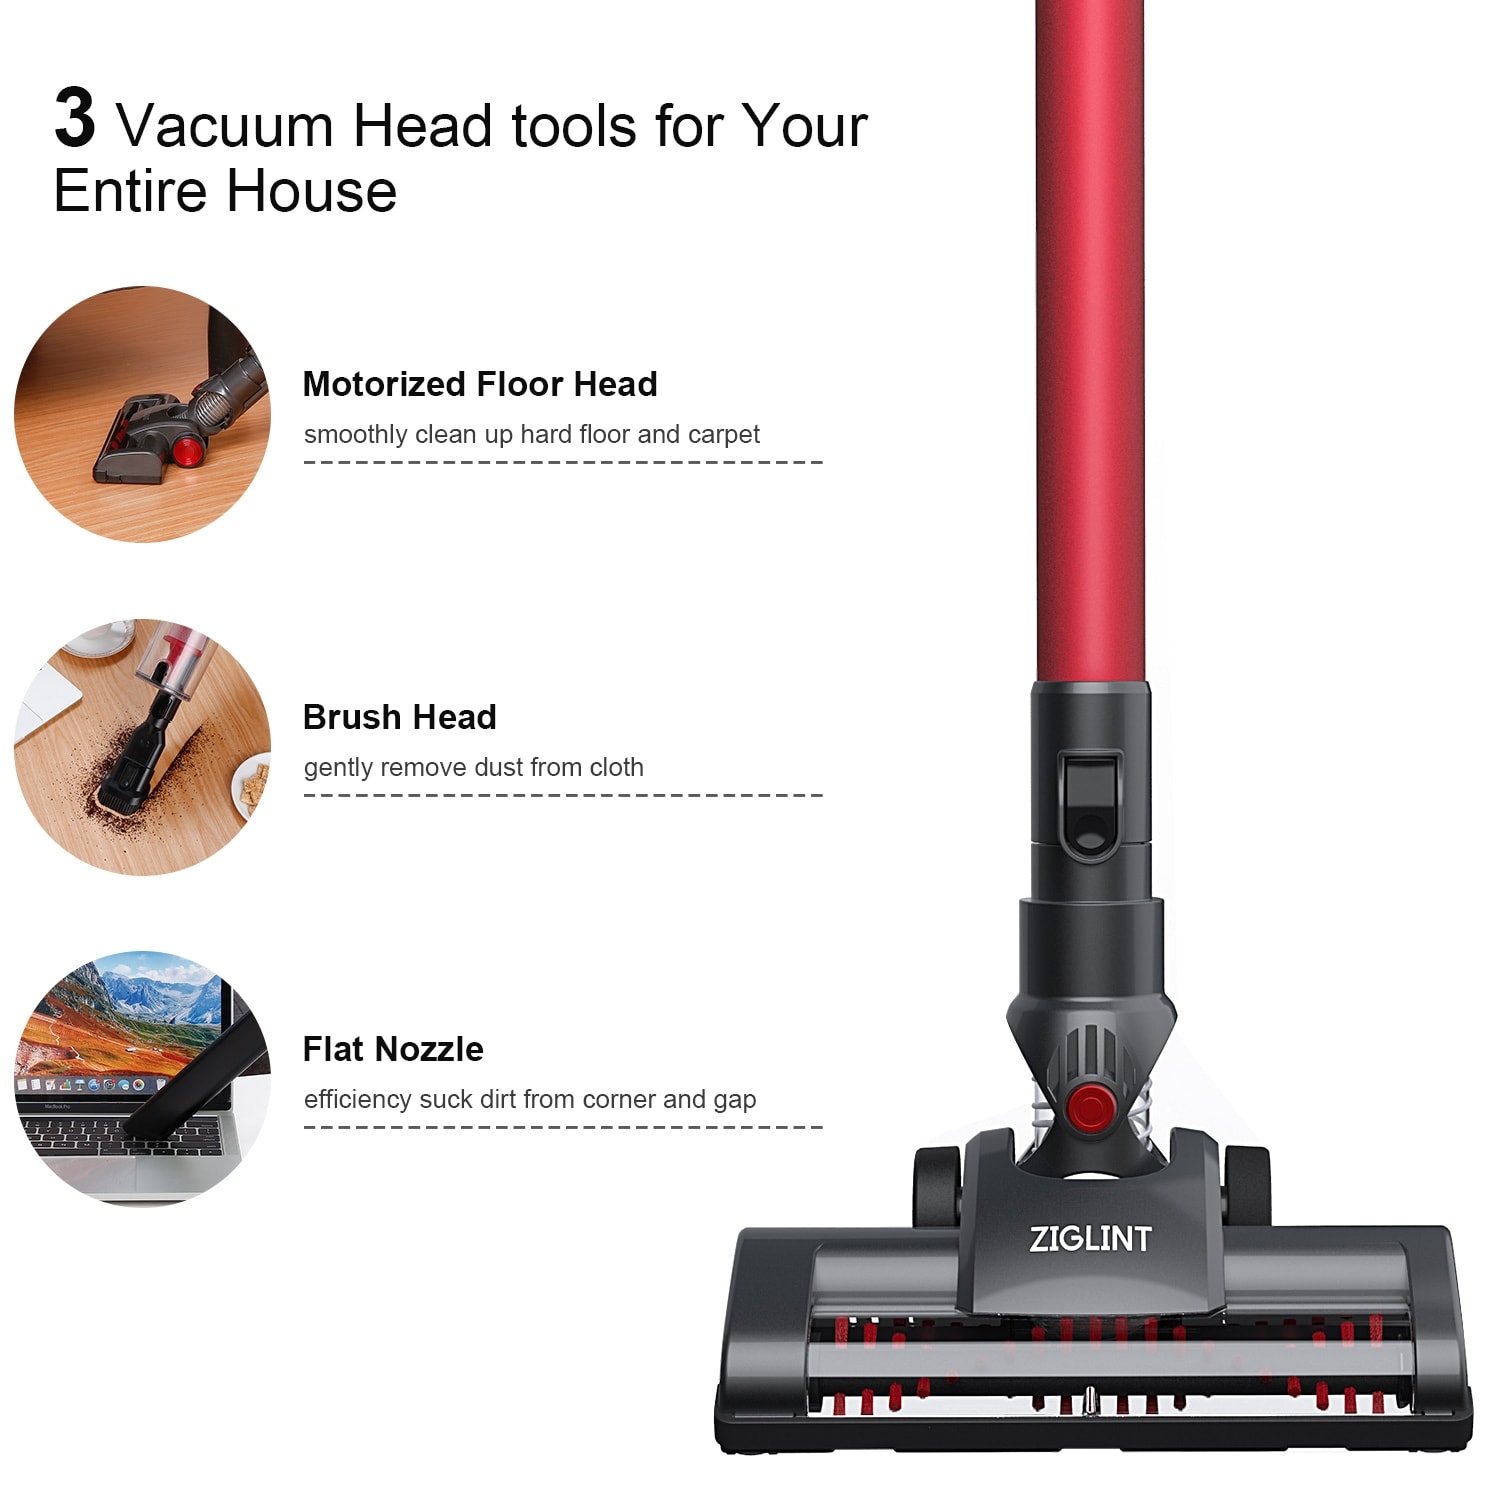 https://ak1.ostkcdn.com/images/products/is/images/direct/90971f778e43ab7385ee91507bedfe3827bdc105/ZIGLINT-Z5-Cordless-Vacuum-Cleaner-2-in-1-Stick-and-Handheld-Portable-Vacuum-with-8KPa-High-Suction.jpg